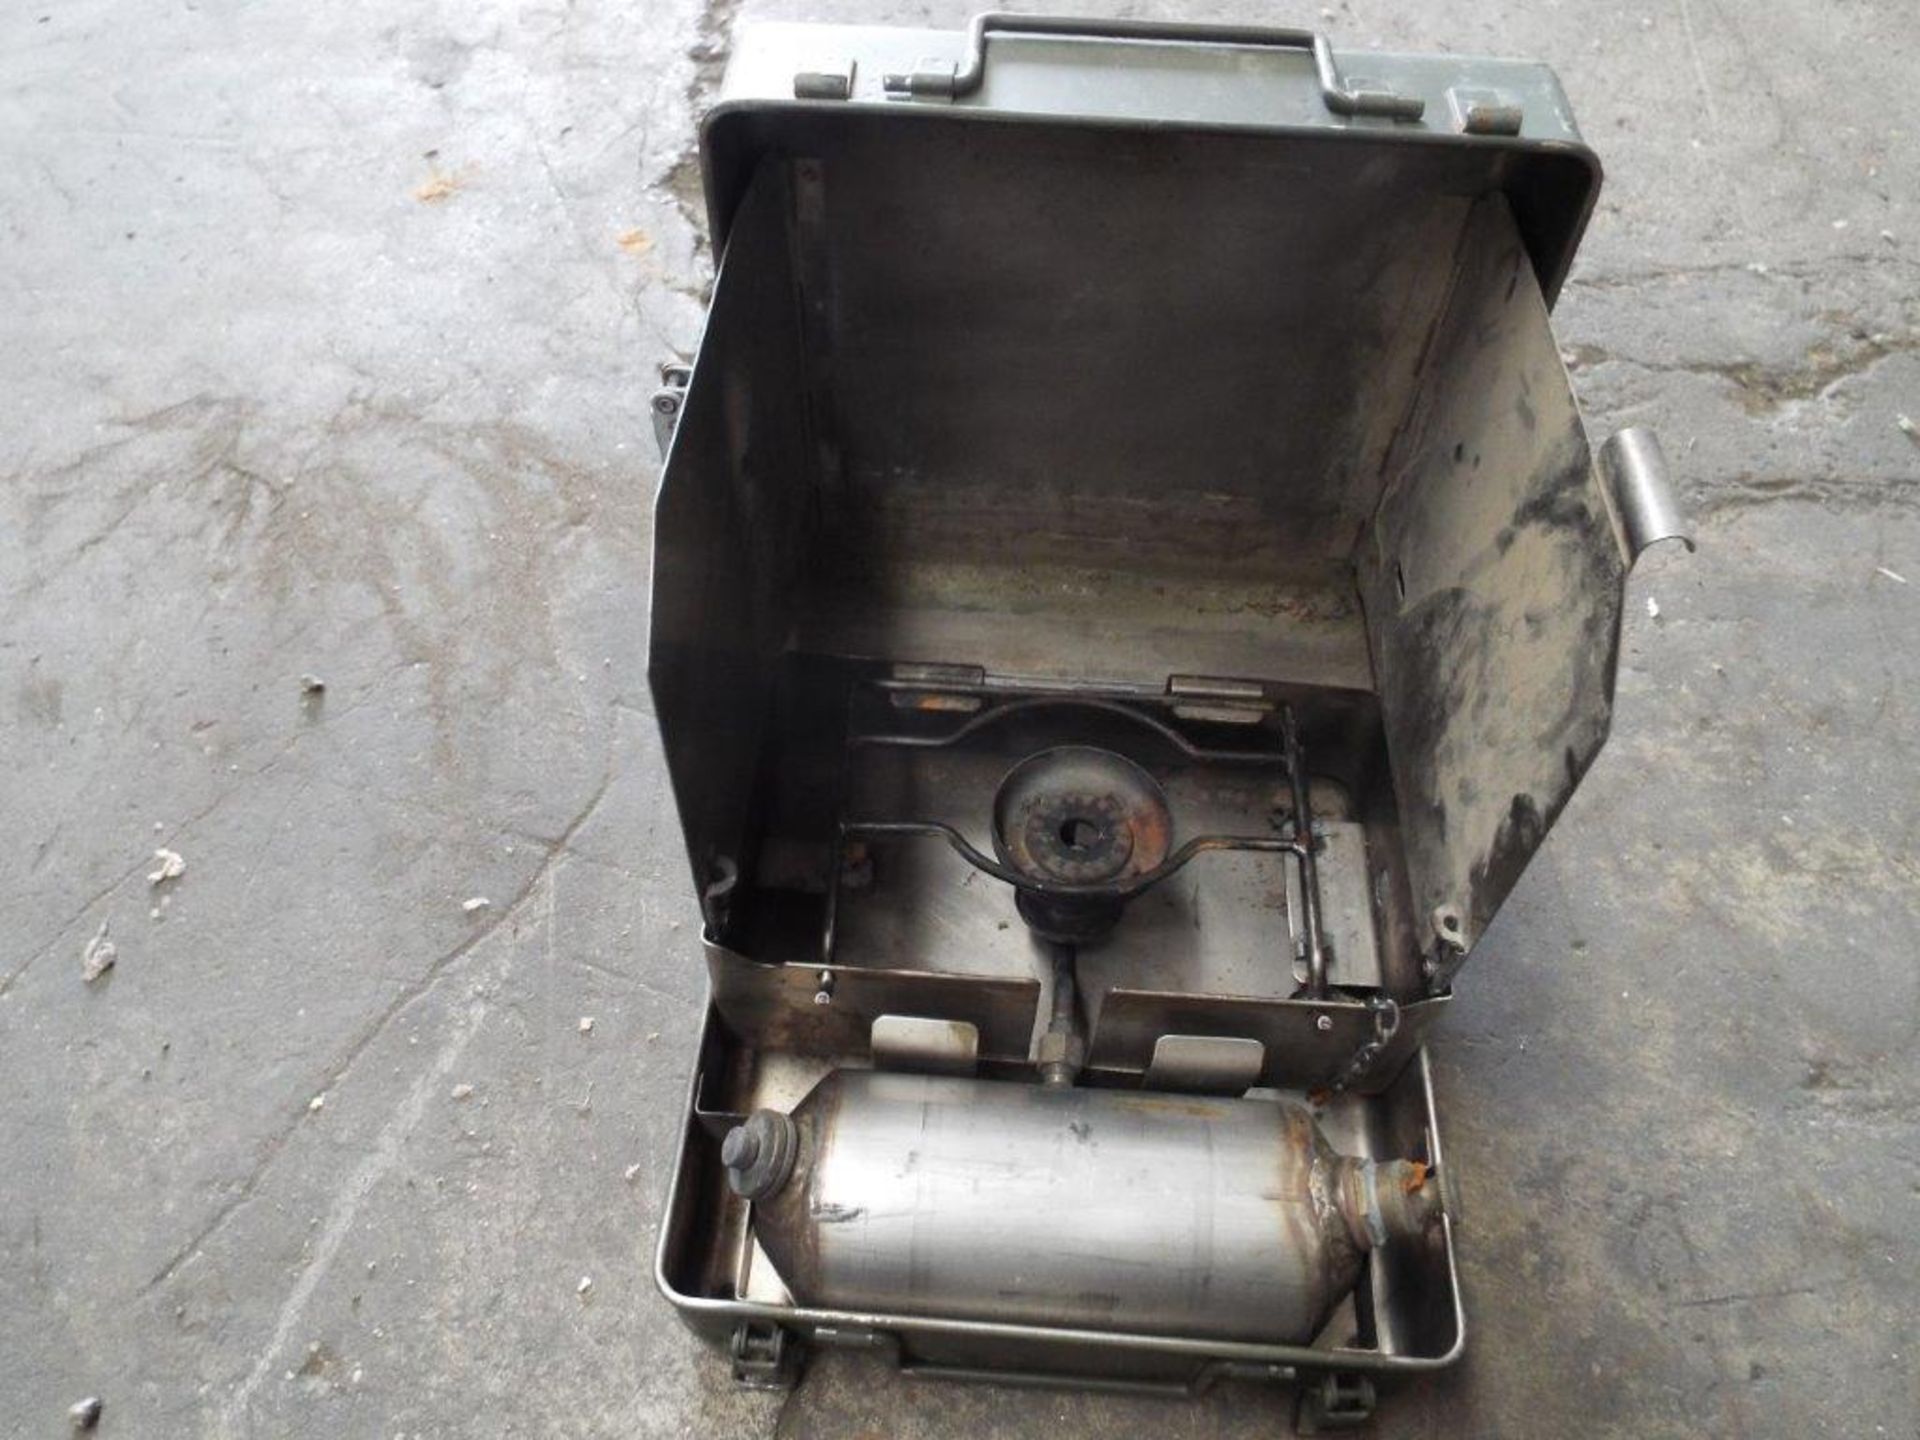 No. 12 Stove, Diesel Cooker/Camping Stove - Image 2 of 6